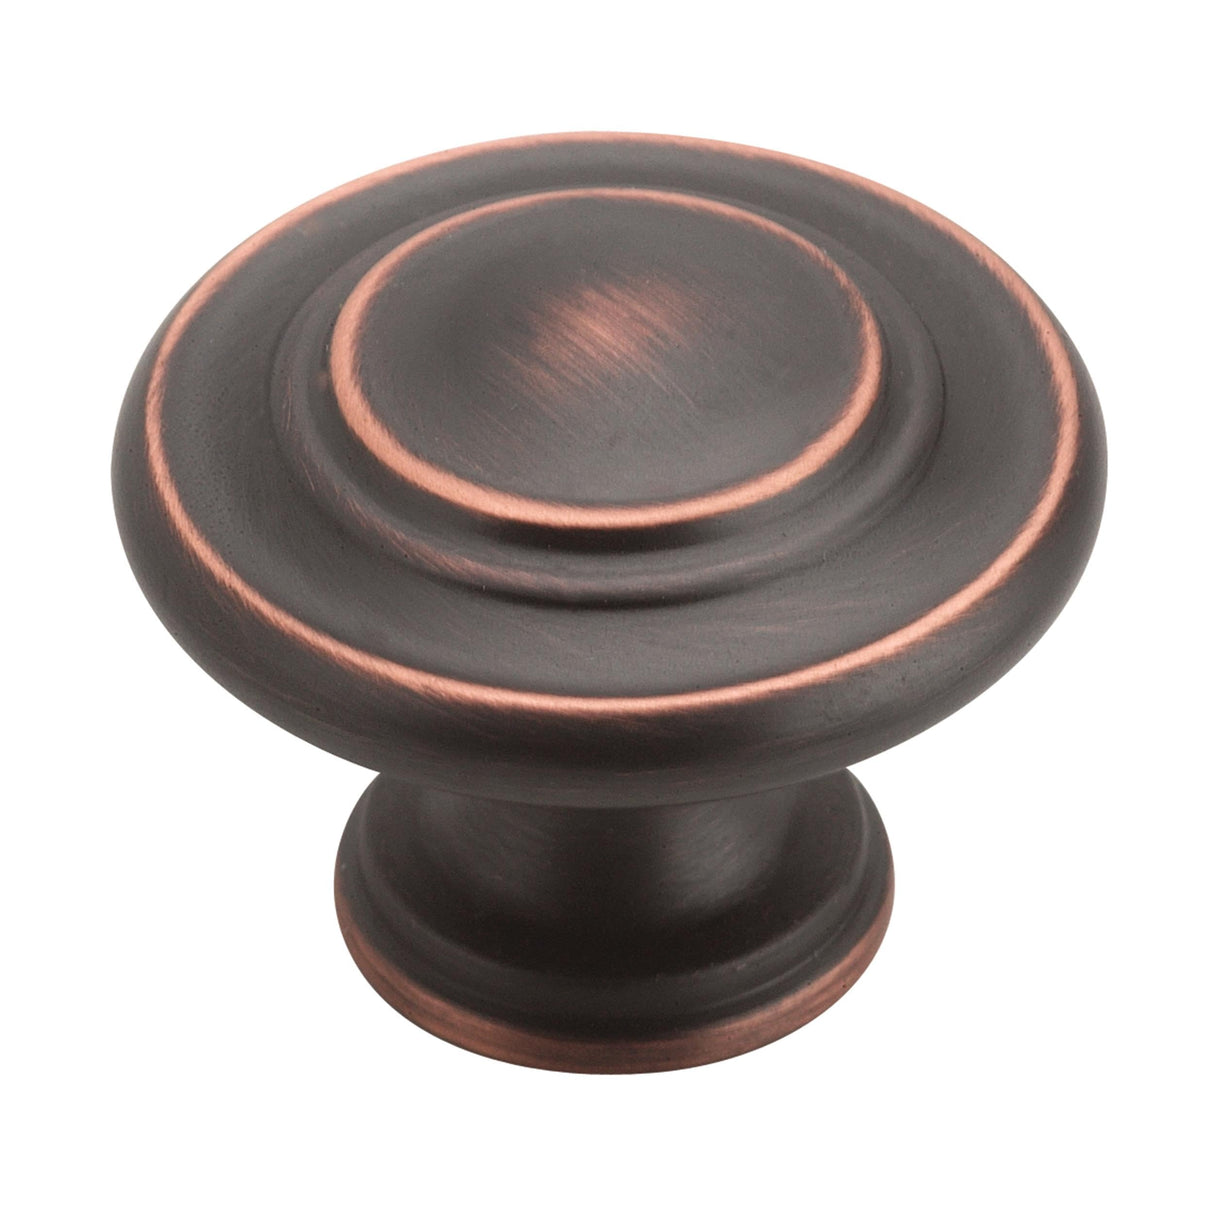 Amerock Cabinet Knob Oil Rubbed Bronze 1-5/16 inch (33 mm) Diameter Inspirations 10 Pack Drawer Knob Cabinet Hardware